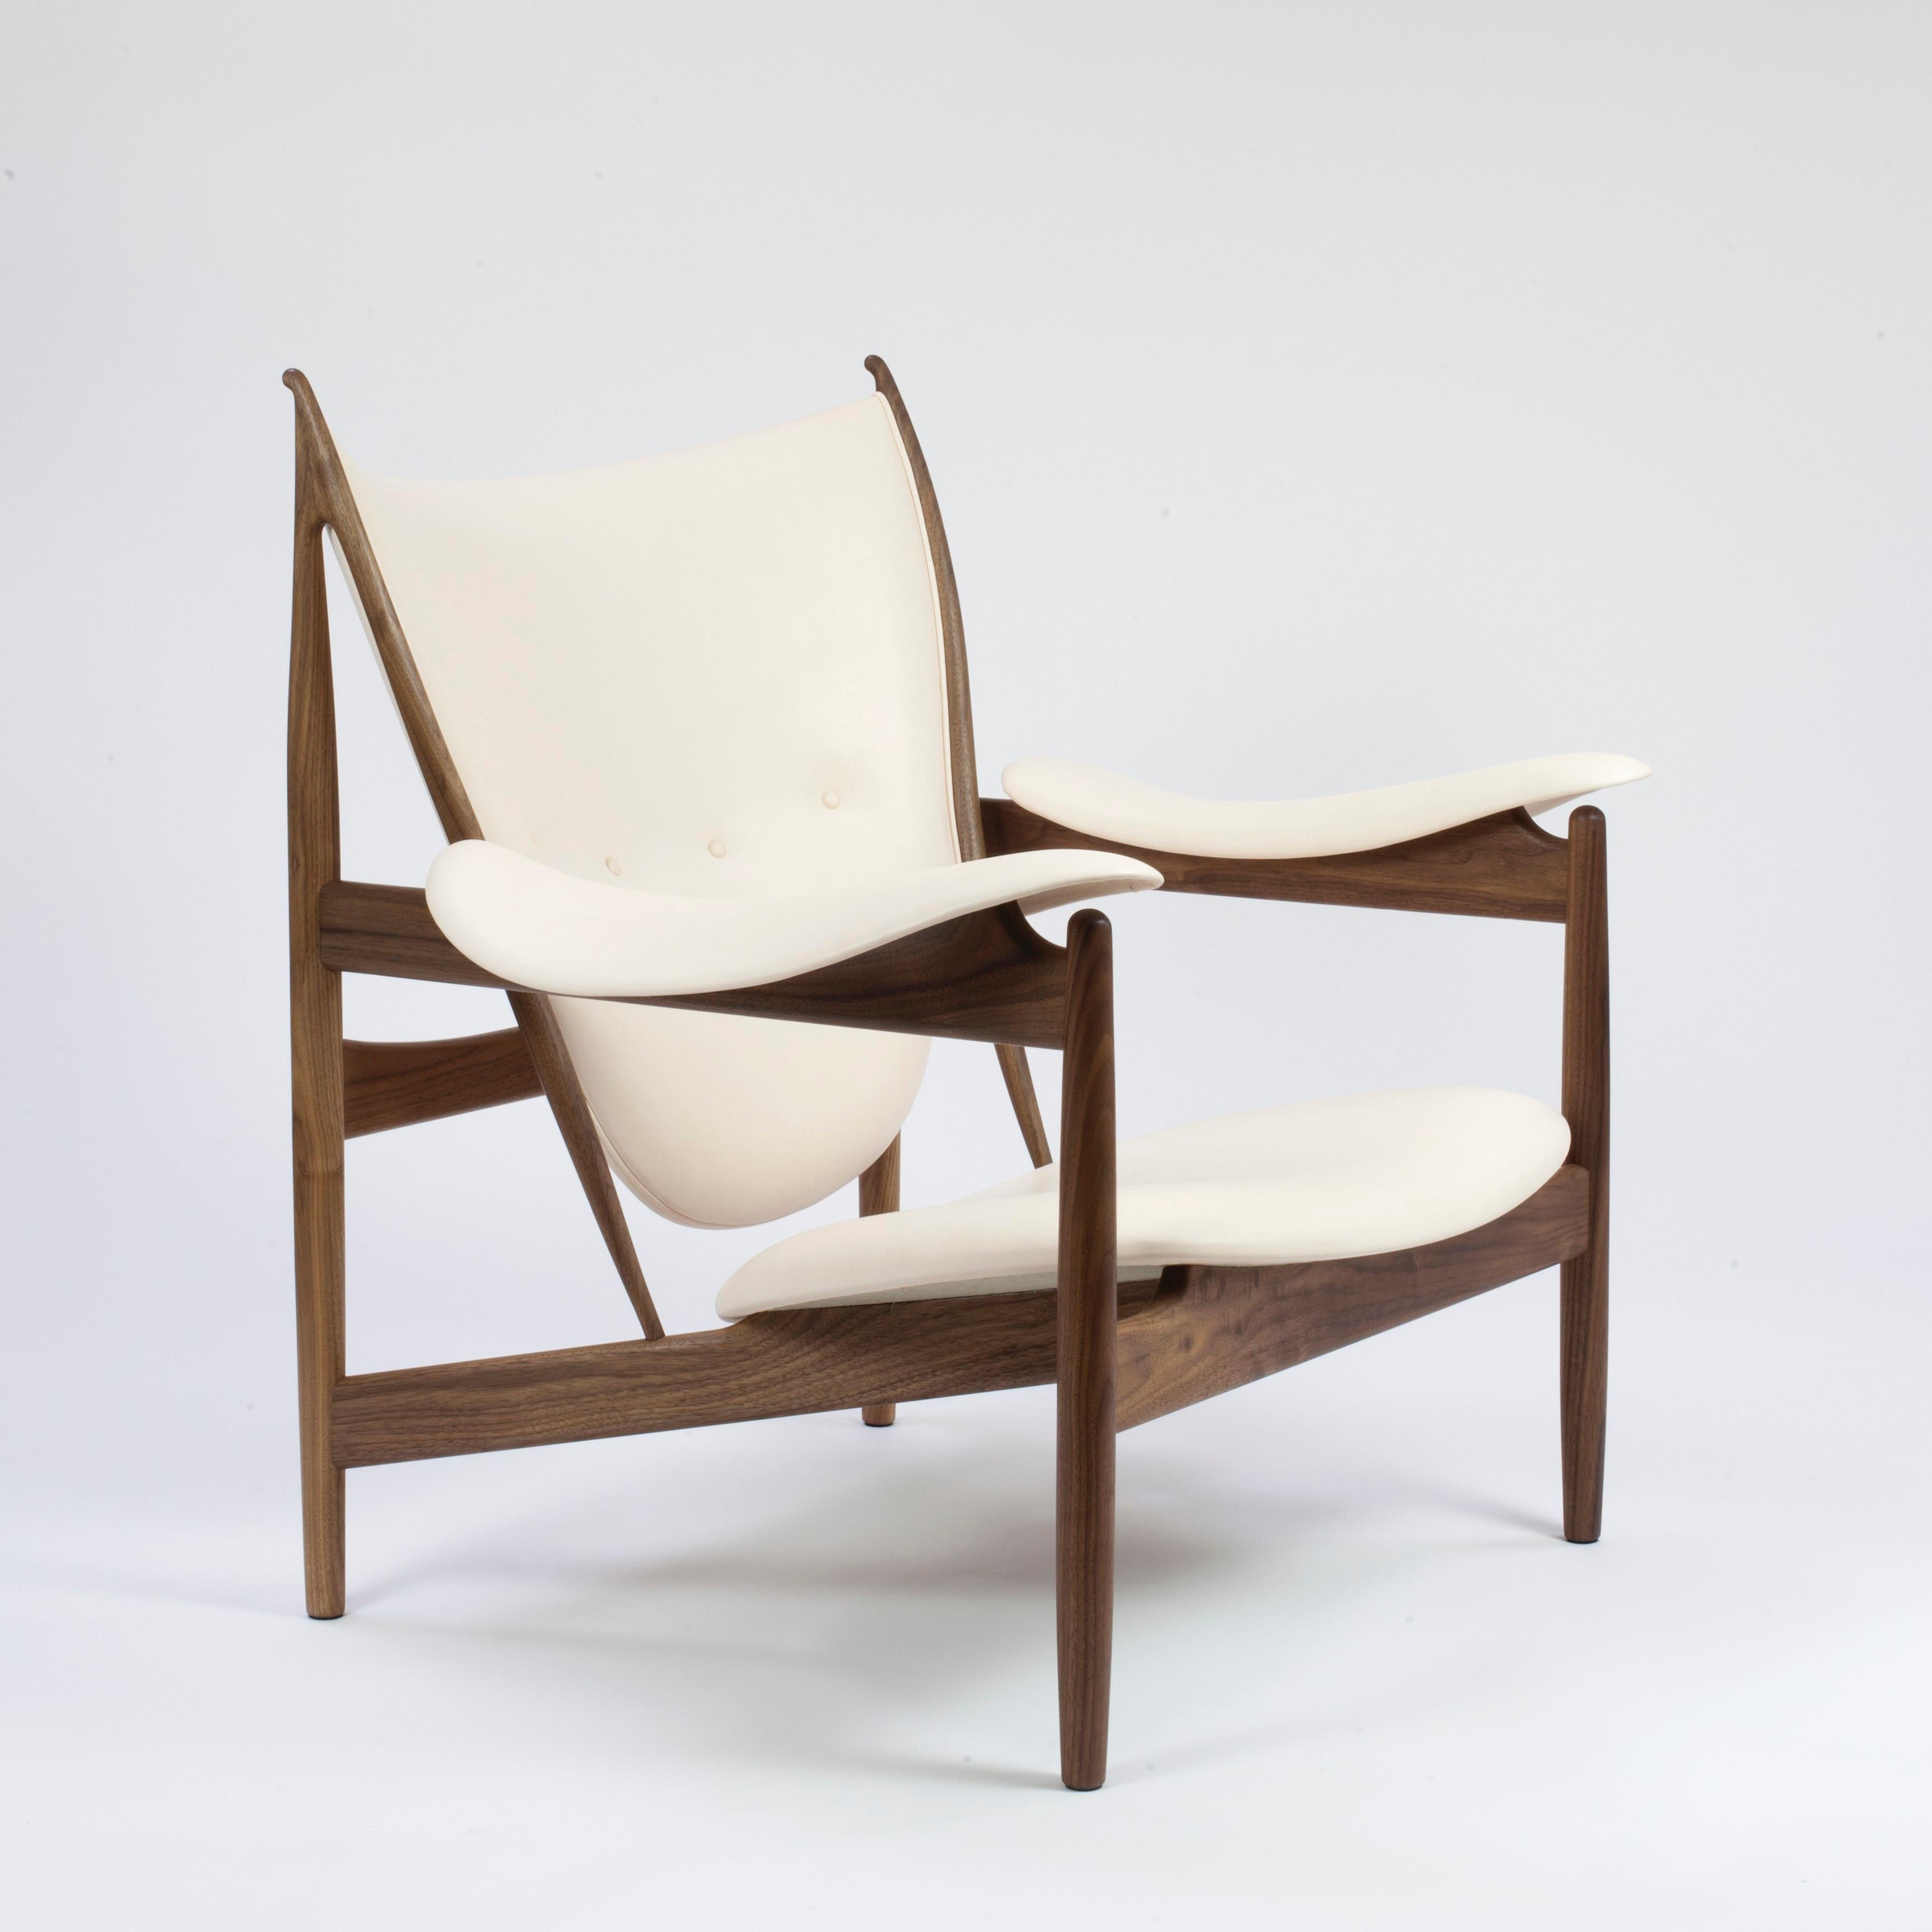 The Finn Juhl Chieftain armchair is a true masterpiece of Danish furniture design. Originally designed by Finn Juhl in 1949, it represented a New Era in Danish furniture design when it was introduced. It is considered to be one of the most important